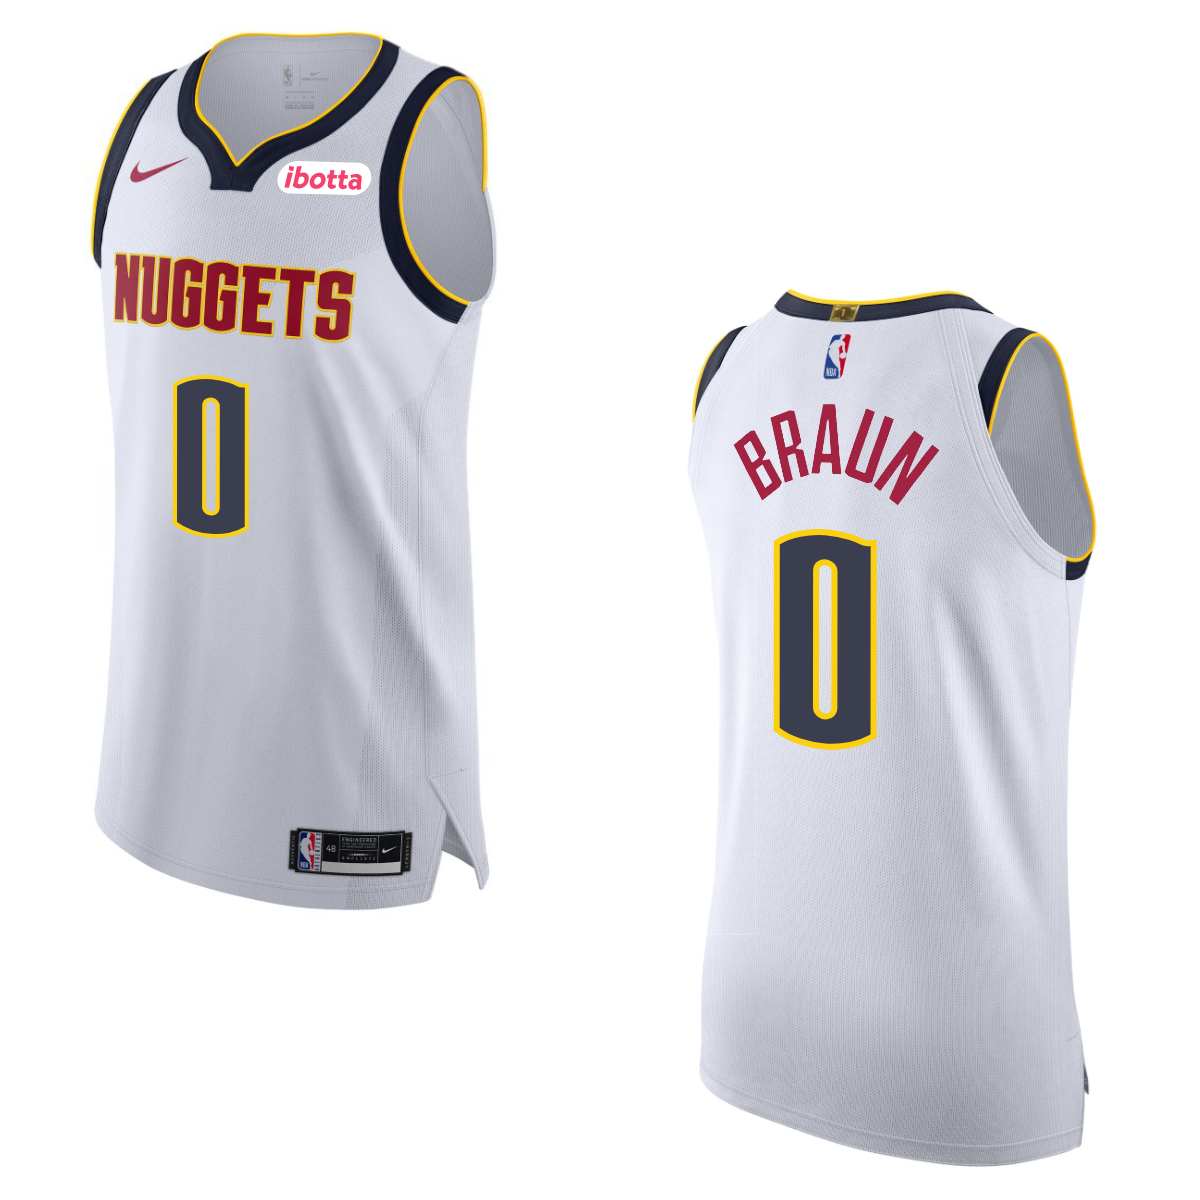 Nuggets Association Authentic Jersey